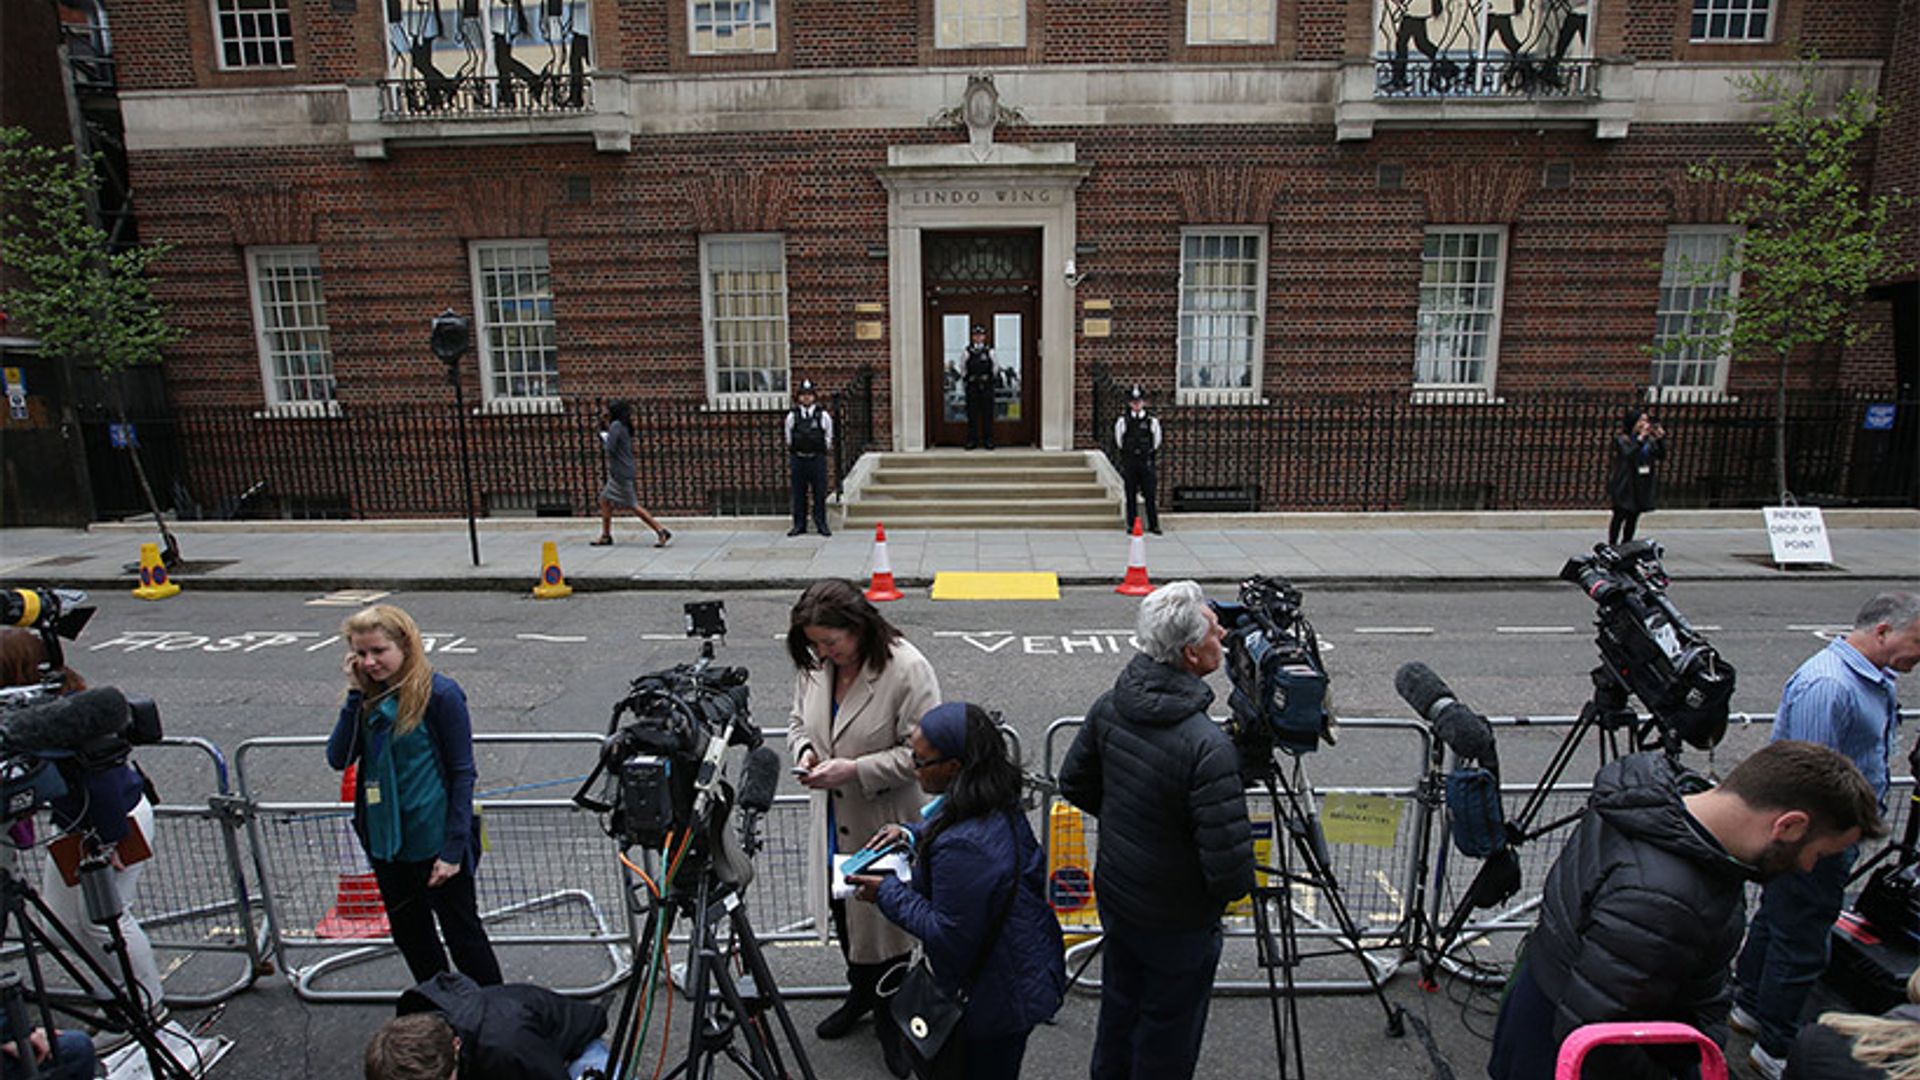 Royal baby: Watch LIVE updates from the Lindo Wing